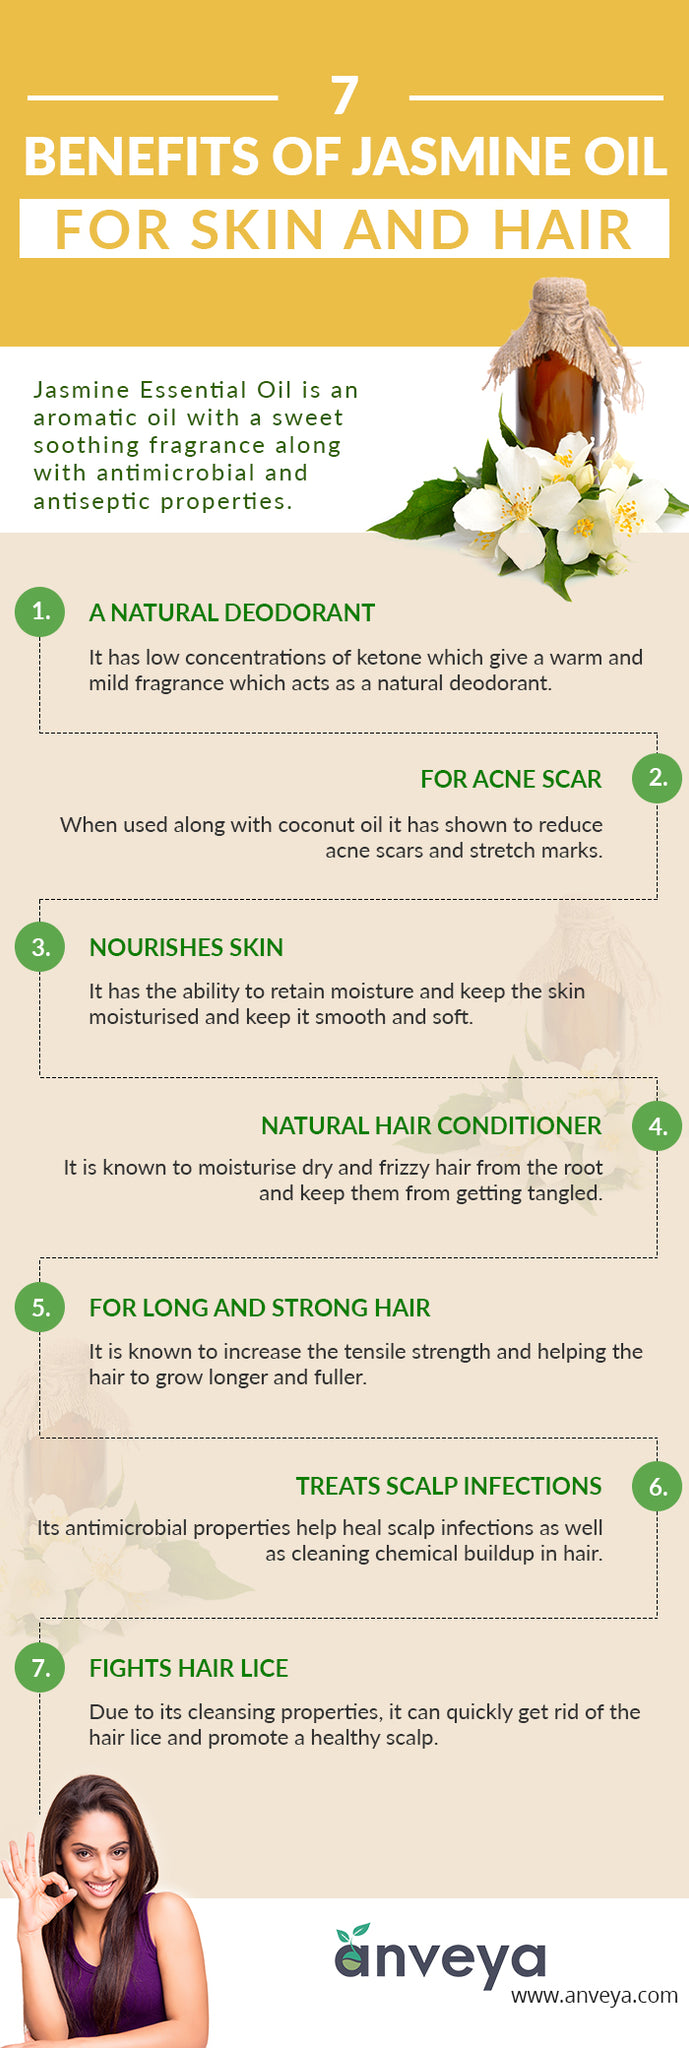 7 Benefits of Jasmine Oil For Hair and Skin